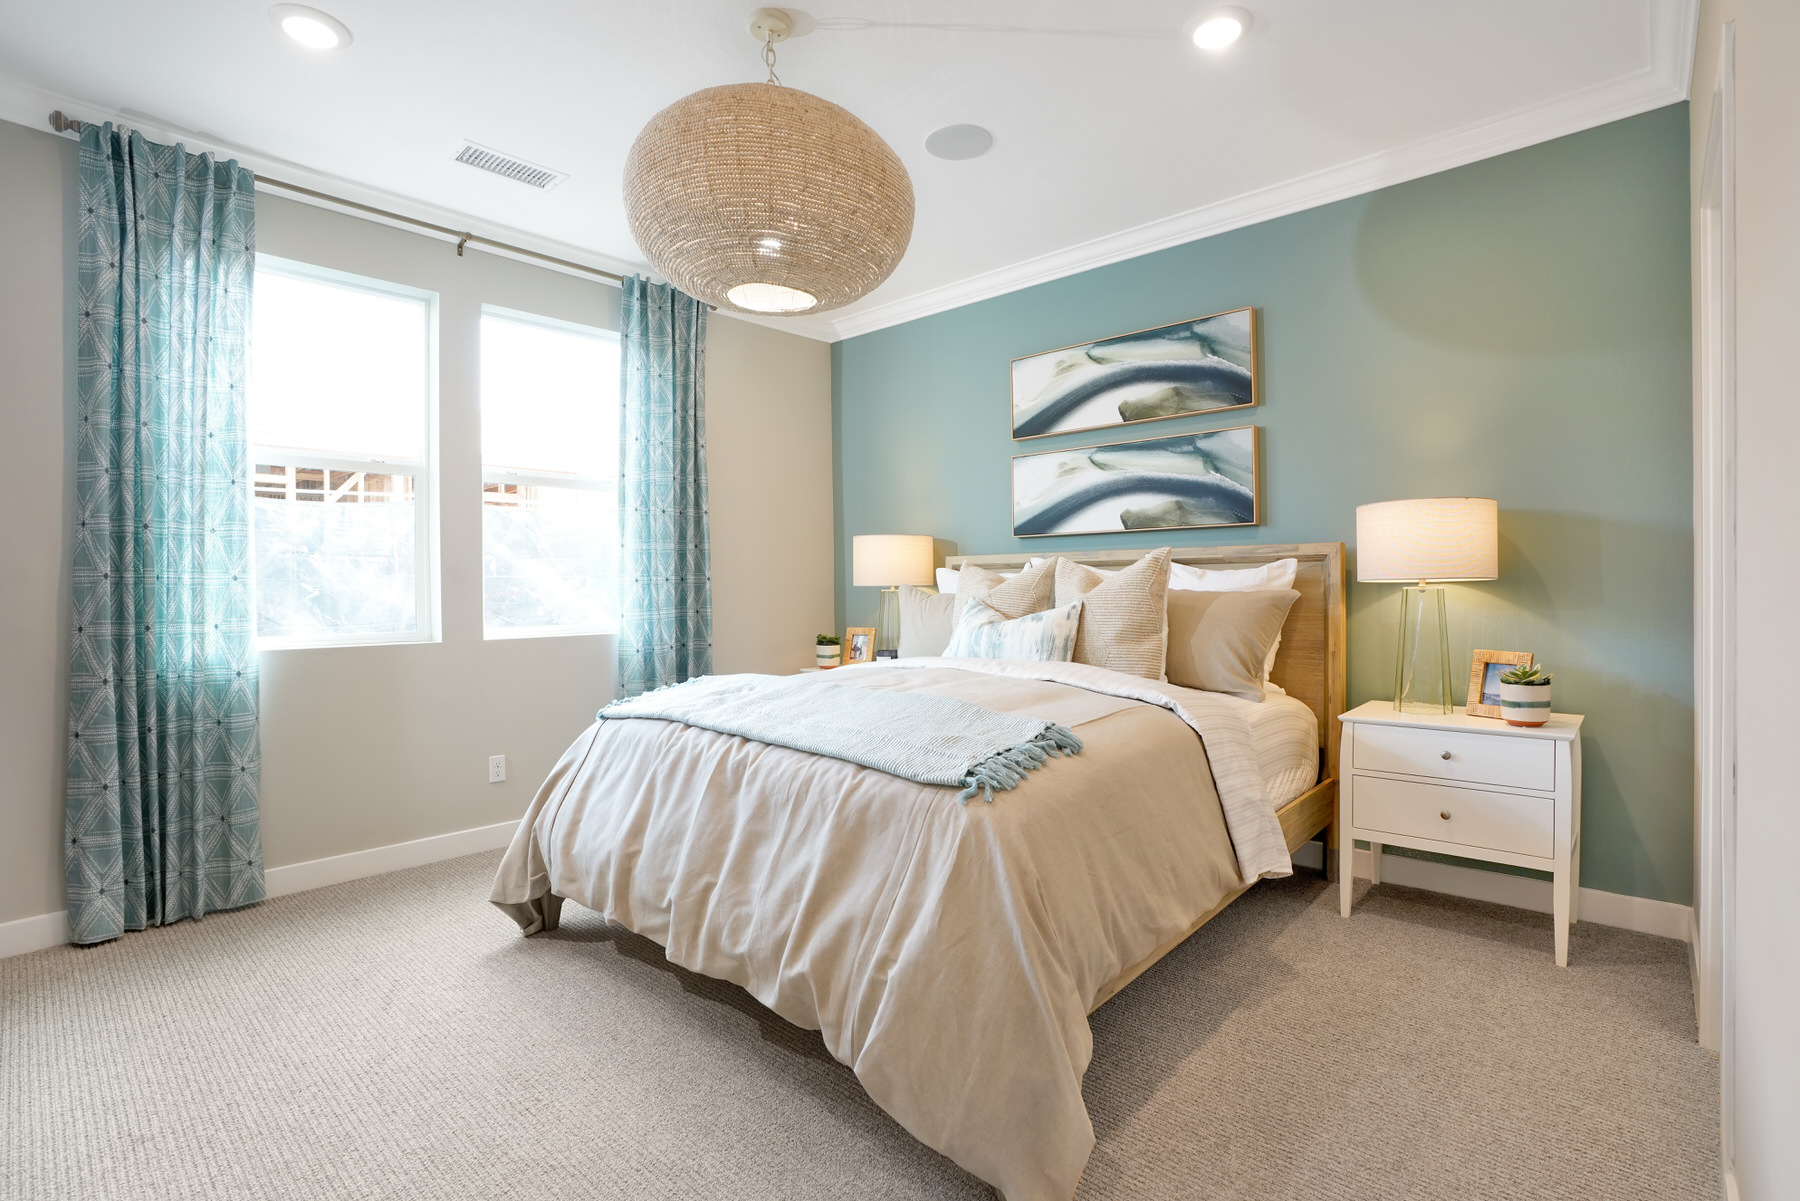 Primary Bedroom in Plan 2 at Townes at Magnolia by Melia Homes in Anaheim, CA